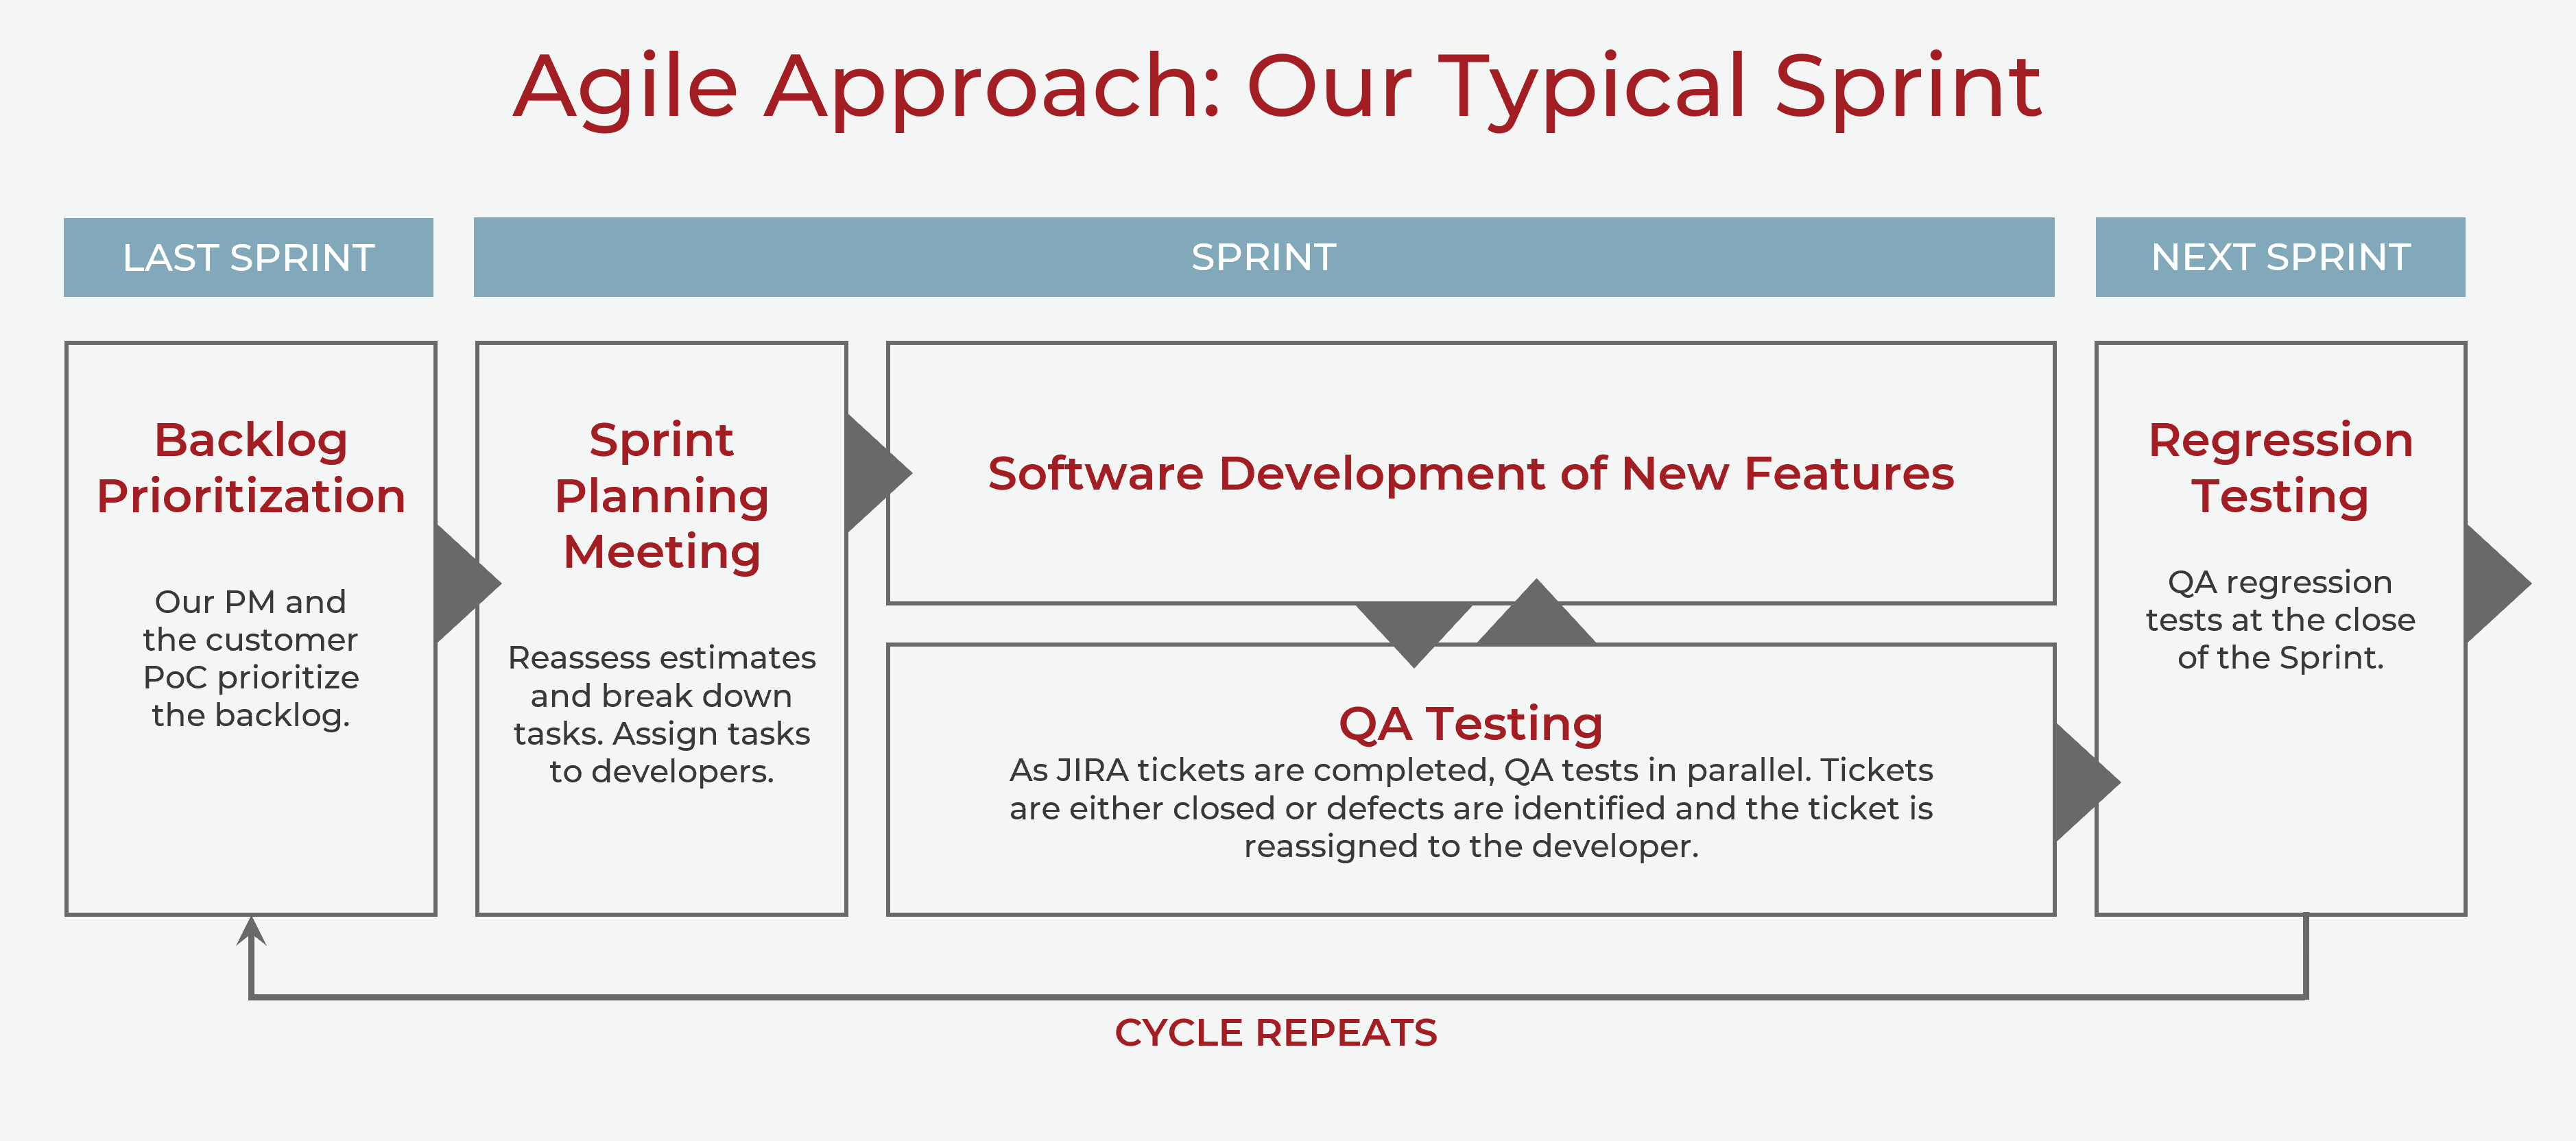 Graphic showing product development partner Cardinal Peak's agile sprint cycle